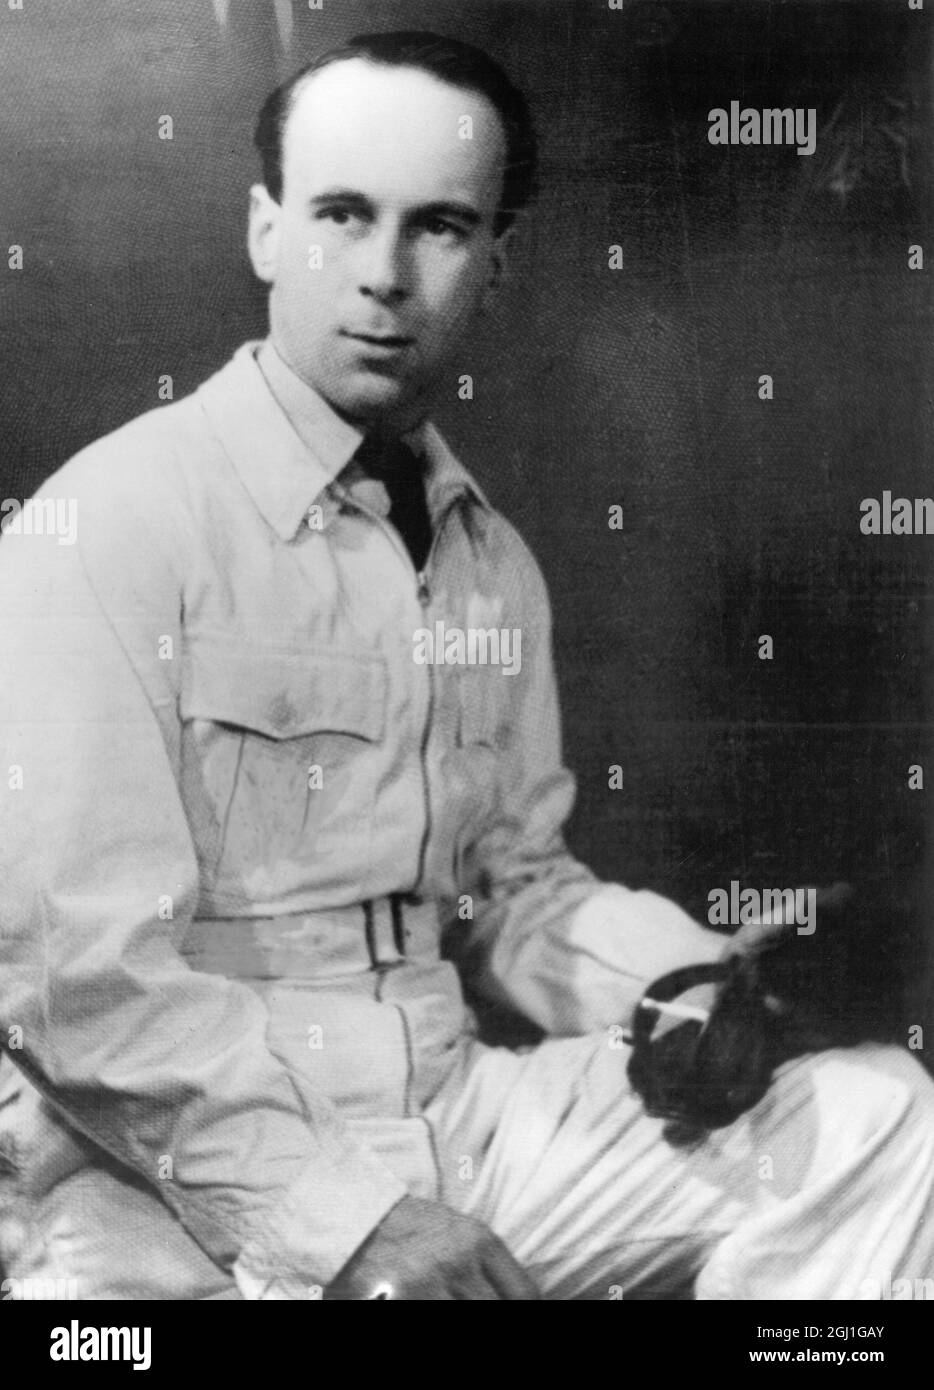 Robert Marshall Cowell in racing driver overalls . This prominent war time fighter pilot would later go on to change sex and his name to Roberta Elizabeth Cowell . 6 March 1954 Stock Photo